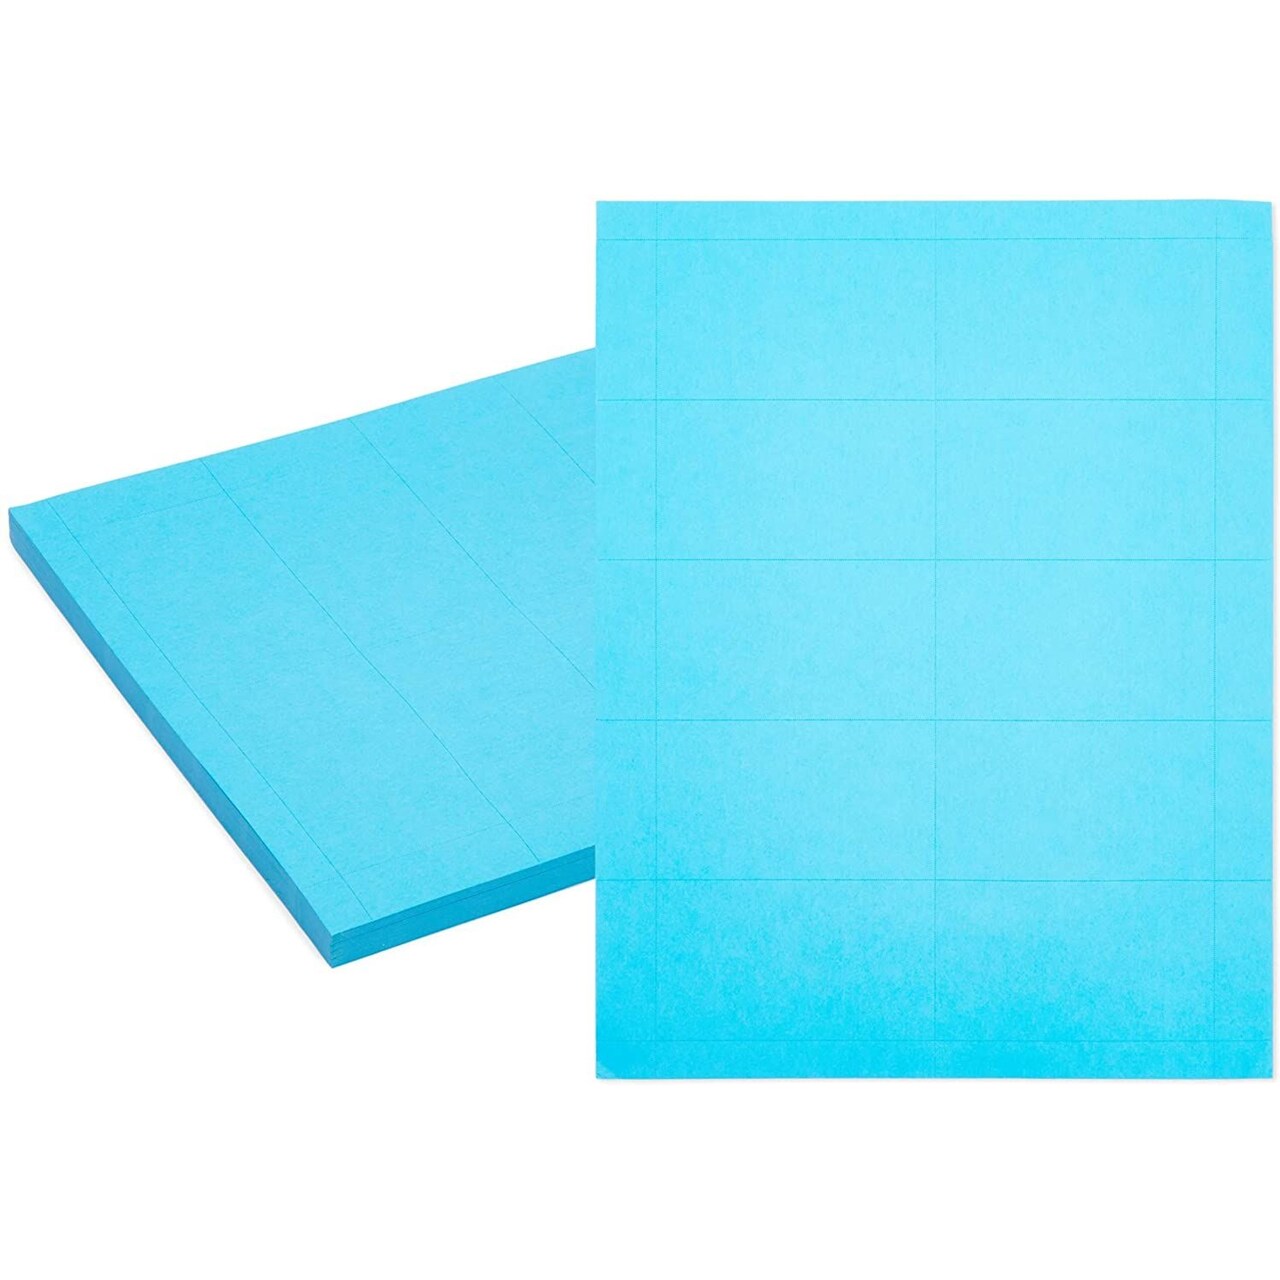 Blue Business Card Paper, 50 Sheets of Blank Printable Cardstock (2 x 3.5  In, 500 Cards)